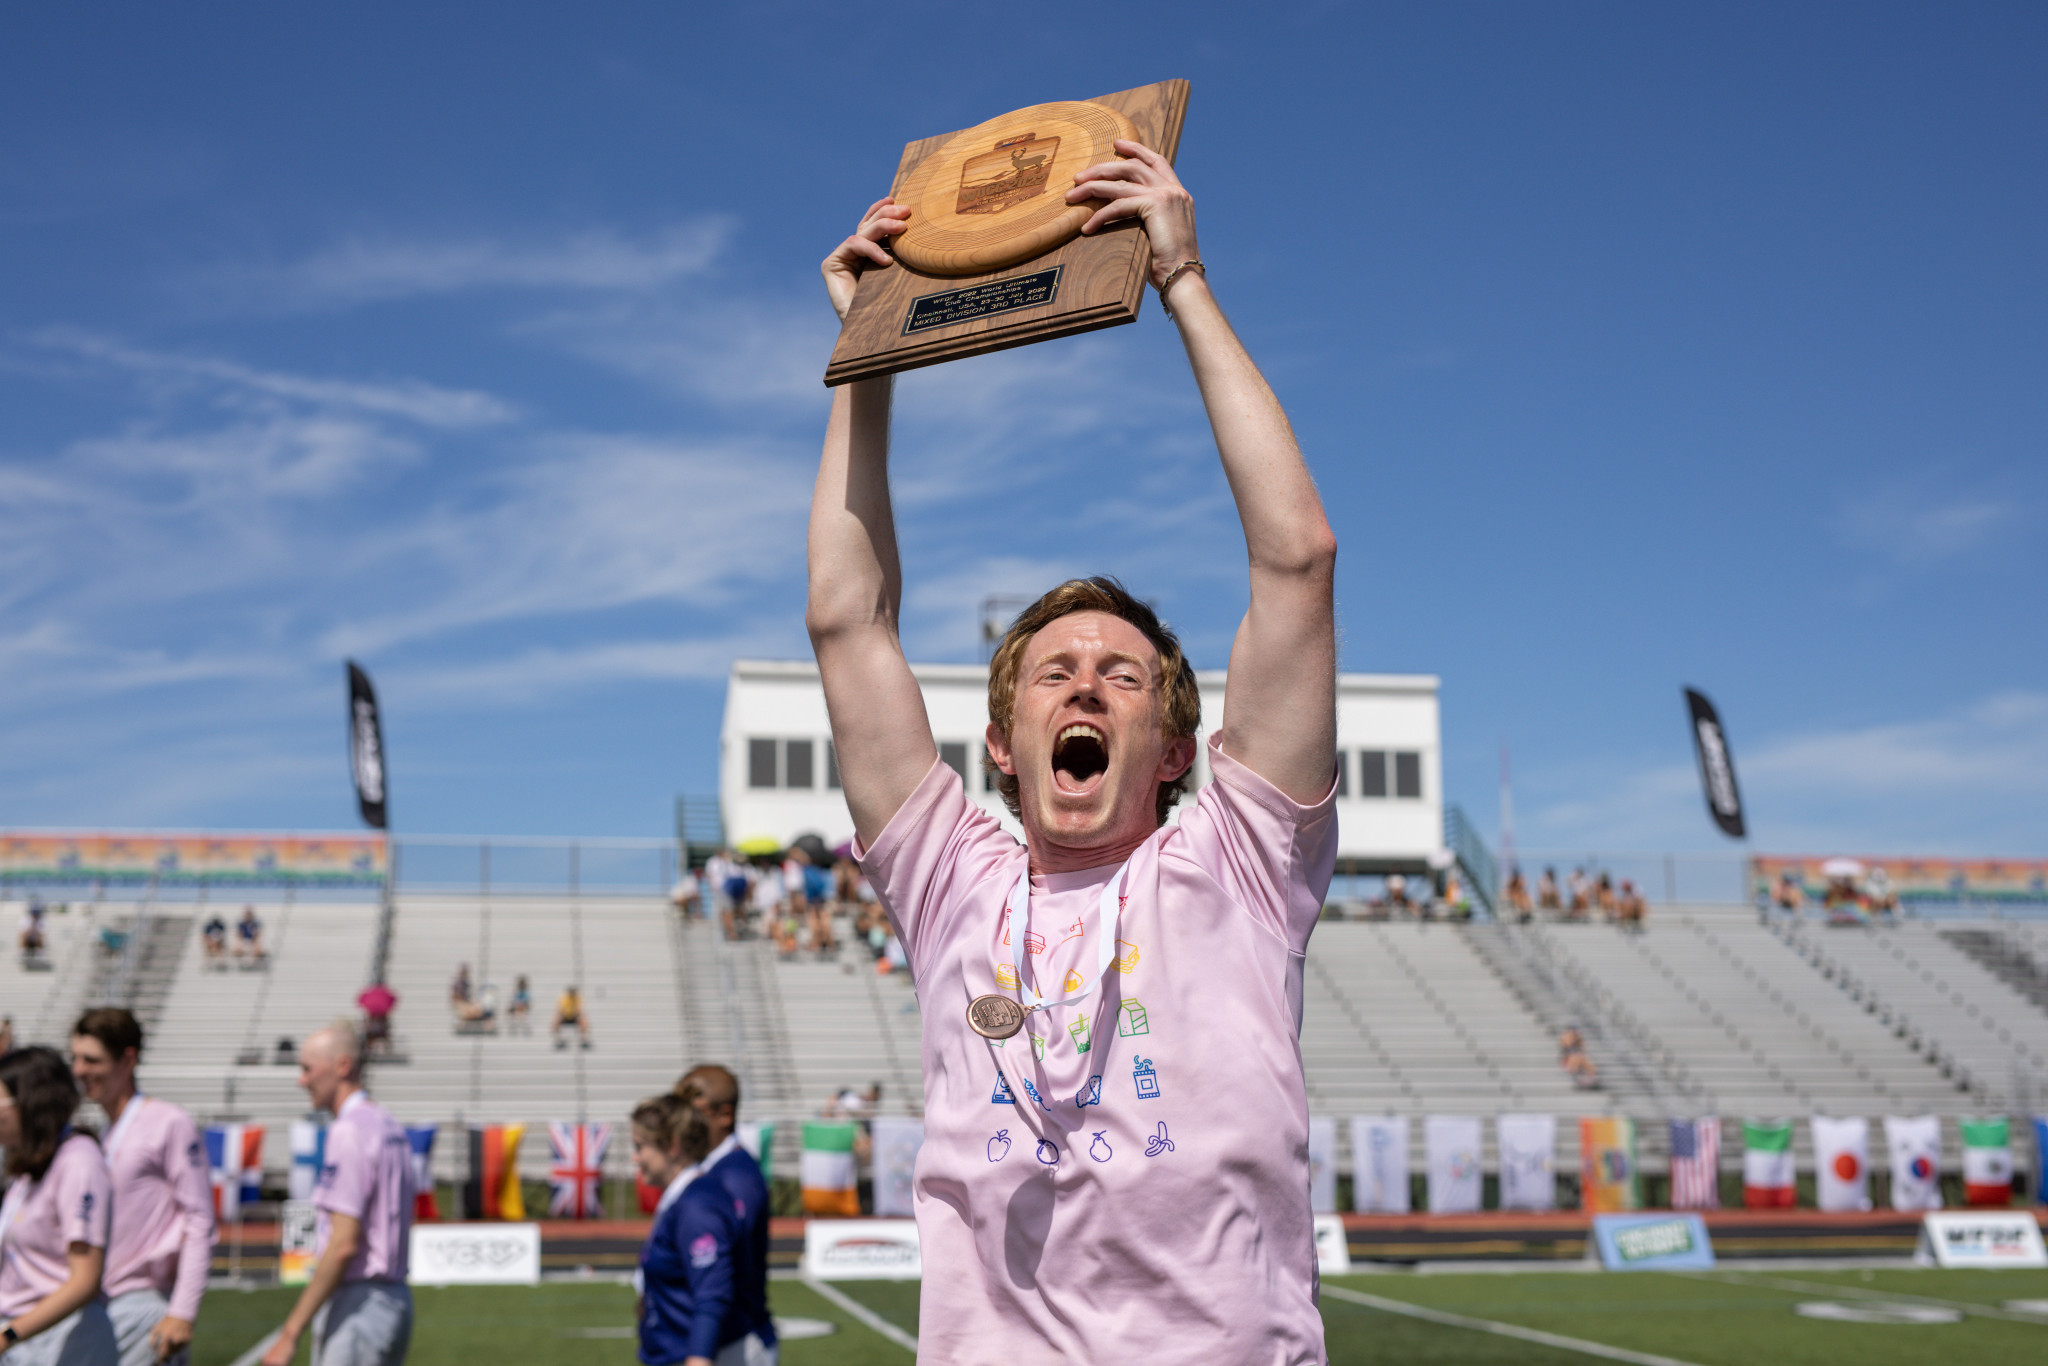 Lunch Box Ultimate Club secured the bronze medal in the mixed division ©Paul Rutherford for UltiPhotos